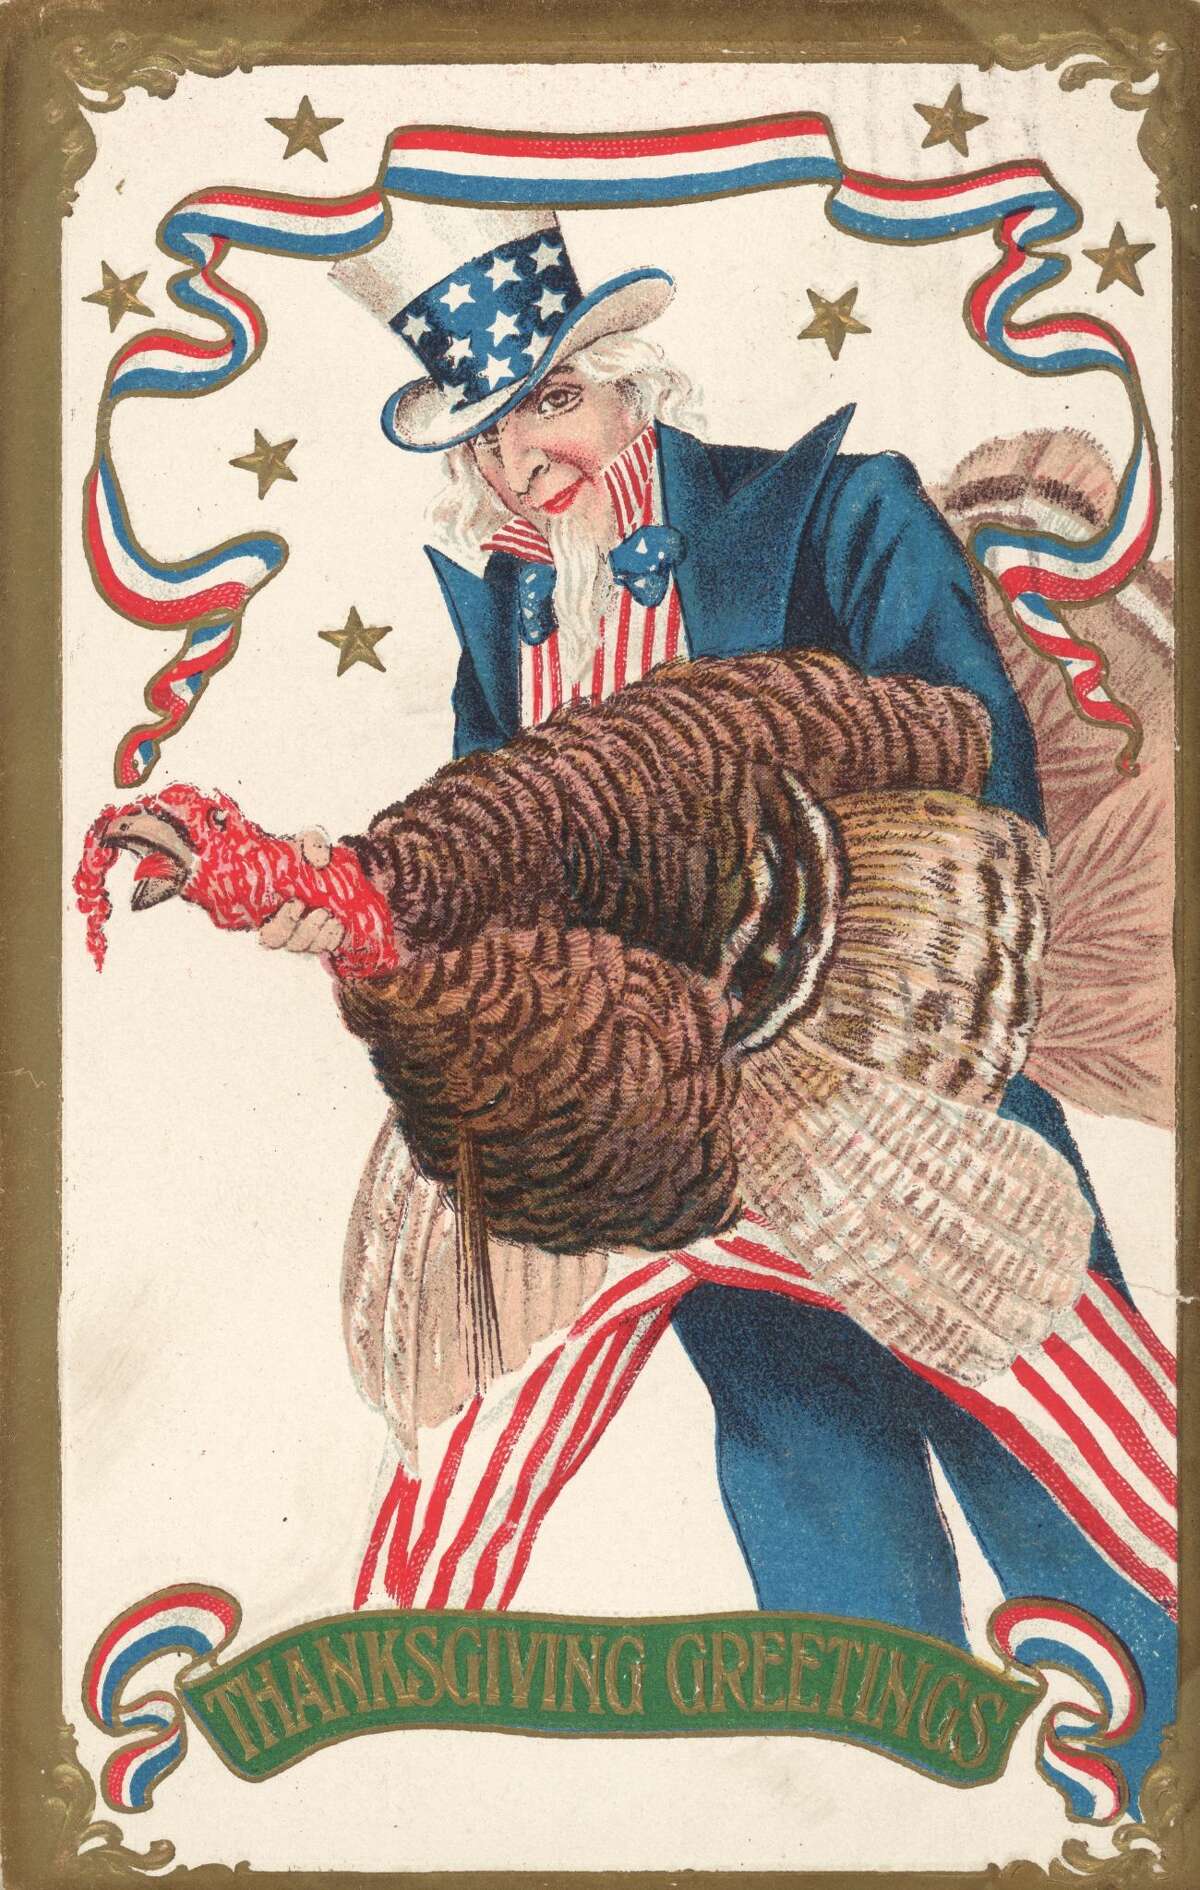 Uncle Sam holds a large live turkey in a postcard, circa 1850.